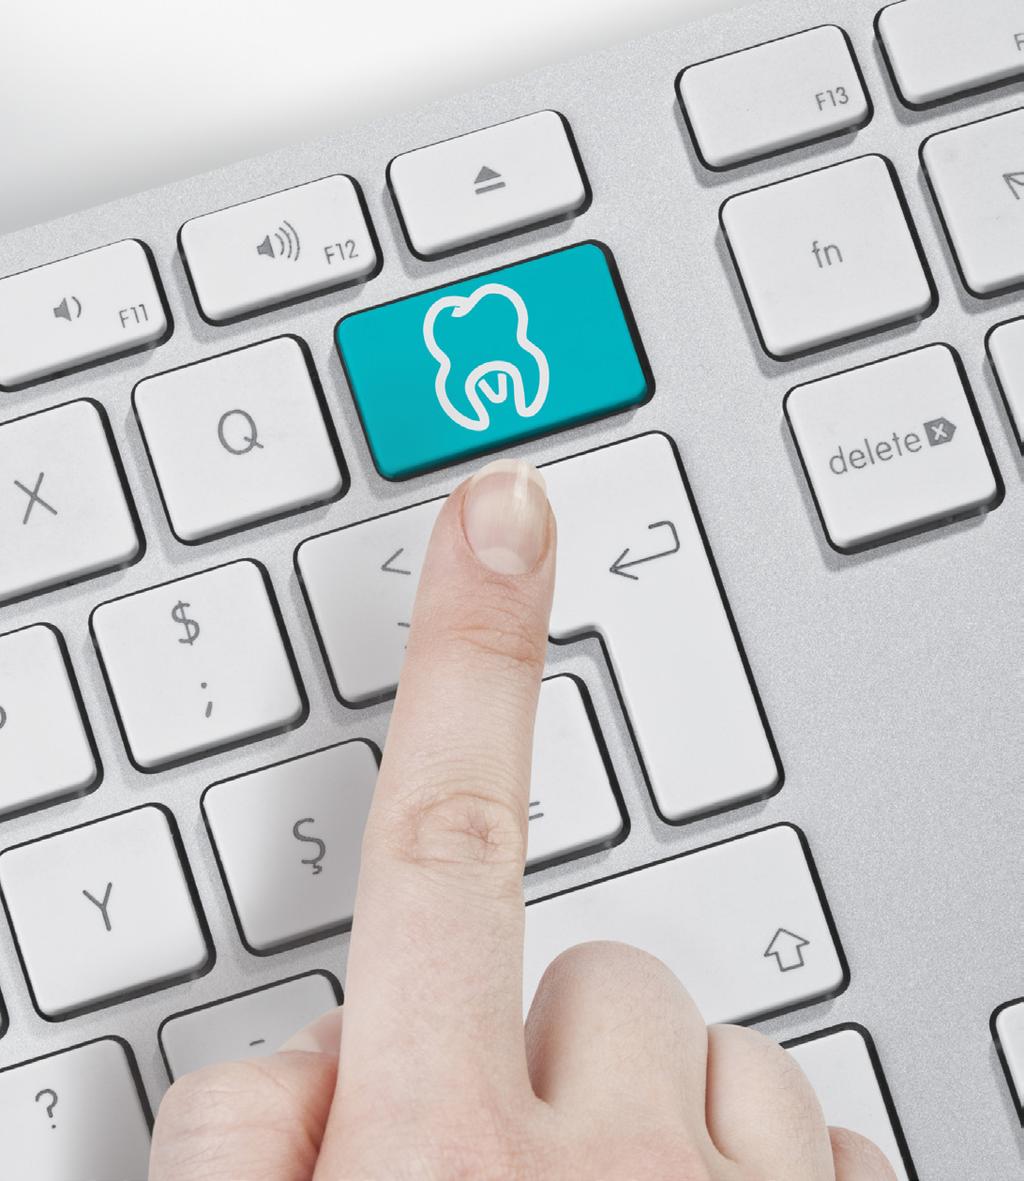 National Mater nal and Child Oral Health Policy Center Align payment policies with quality improvement: Dental care expenditures are projected to almost triple between 2000 and 2020, going from $62